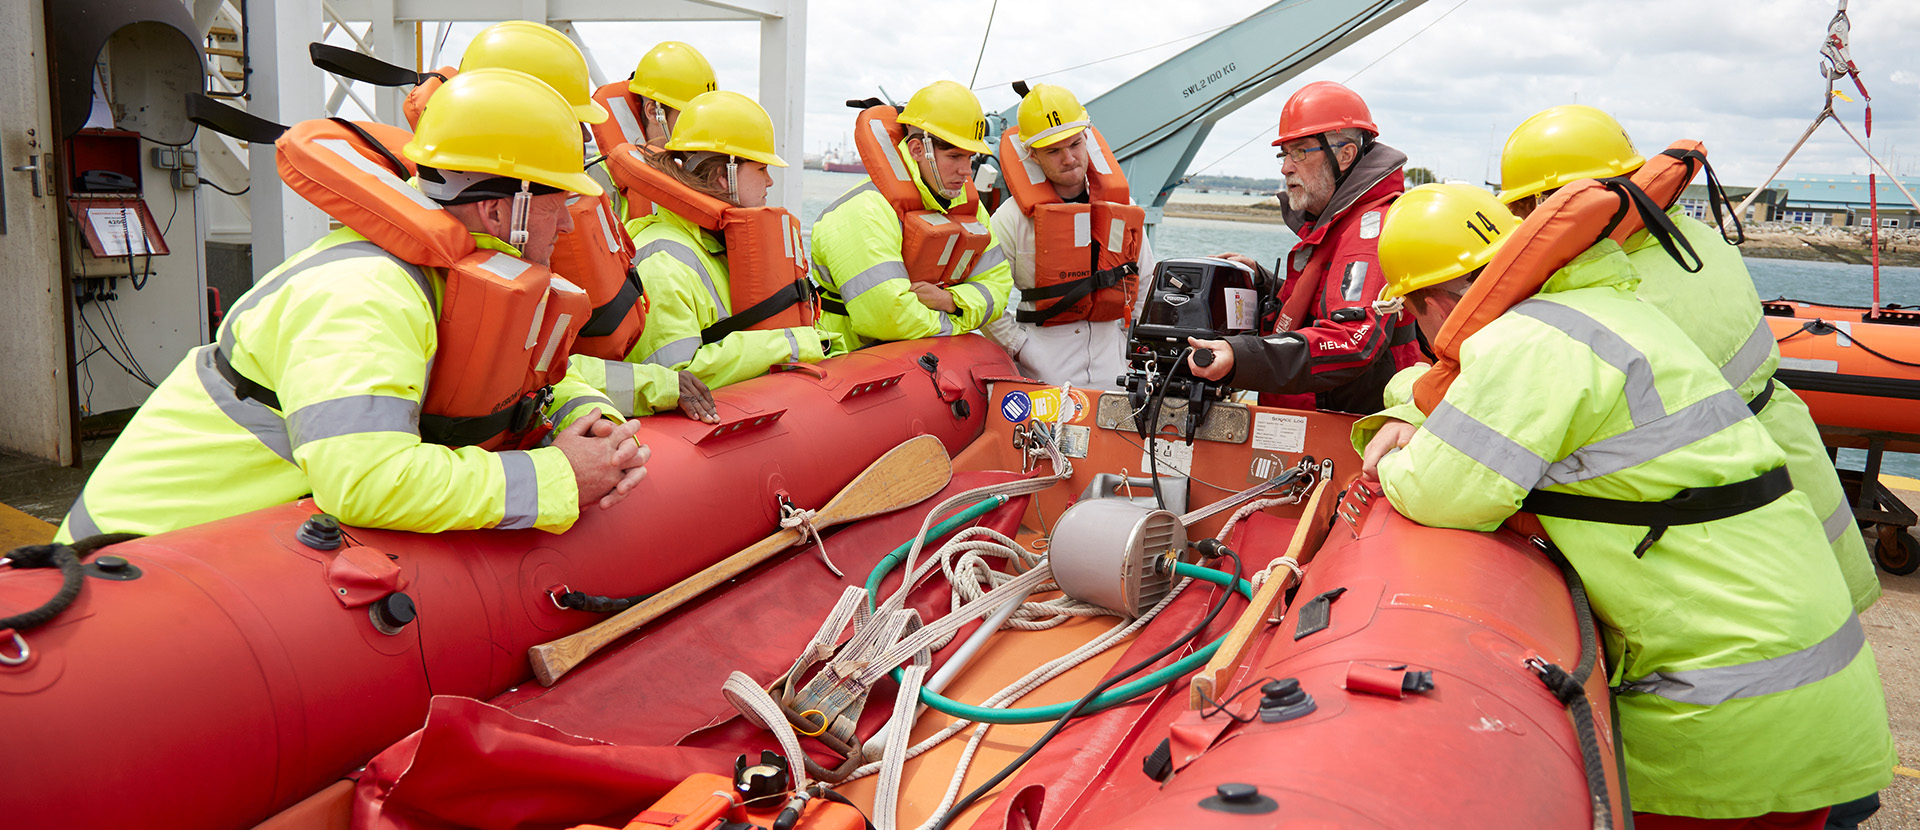 Seafarers training on a survival craft at Warsash wearing PPE equipment